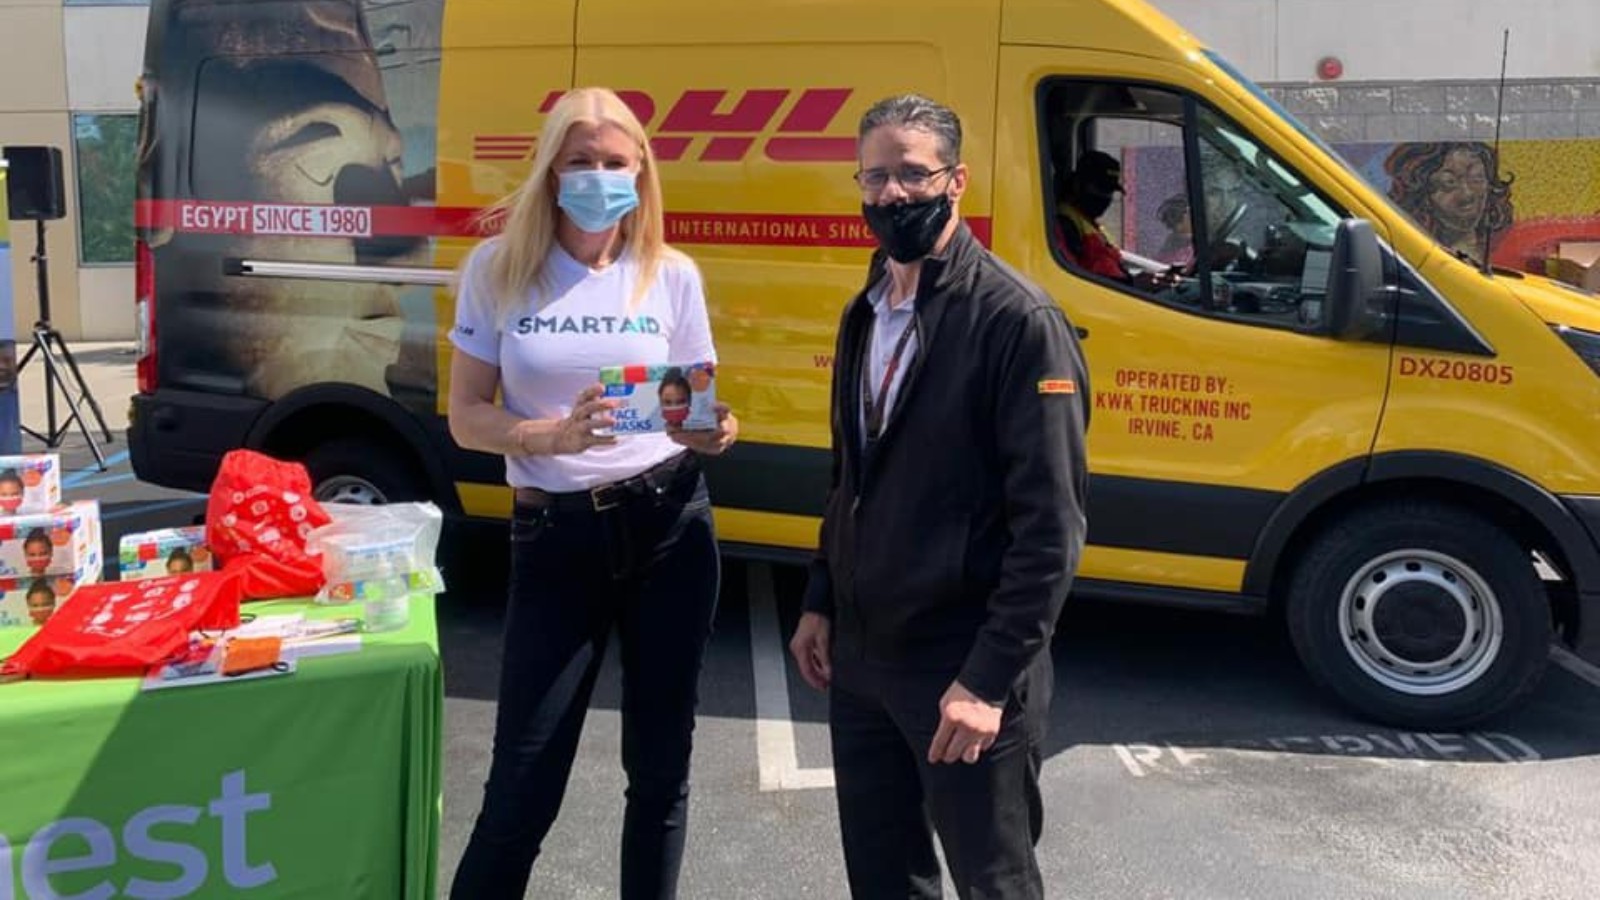 A SmartAID volunteer giving out PPE in Los Angeles County. Photo courtesy of SmartAID